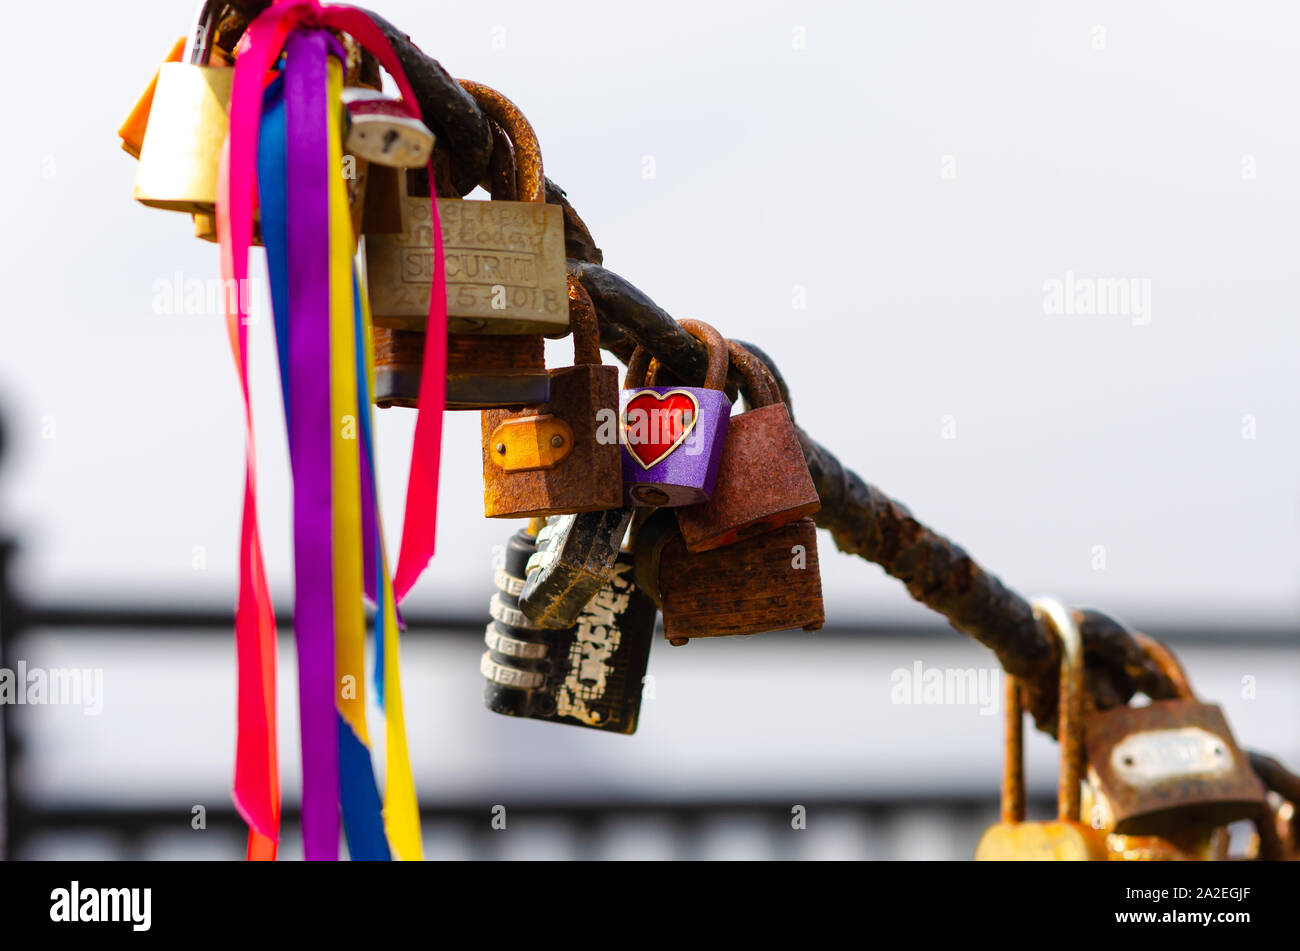 Love Locks at Albert Dock,  Liverpool. The fence chains are full of contrast: old rusted and brand new padlocks of different shape and sizes. Stock Photo